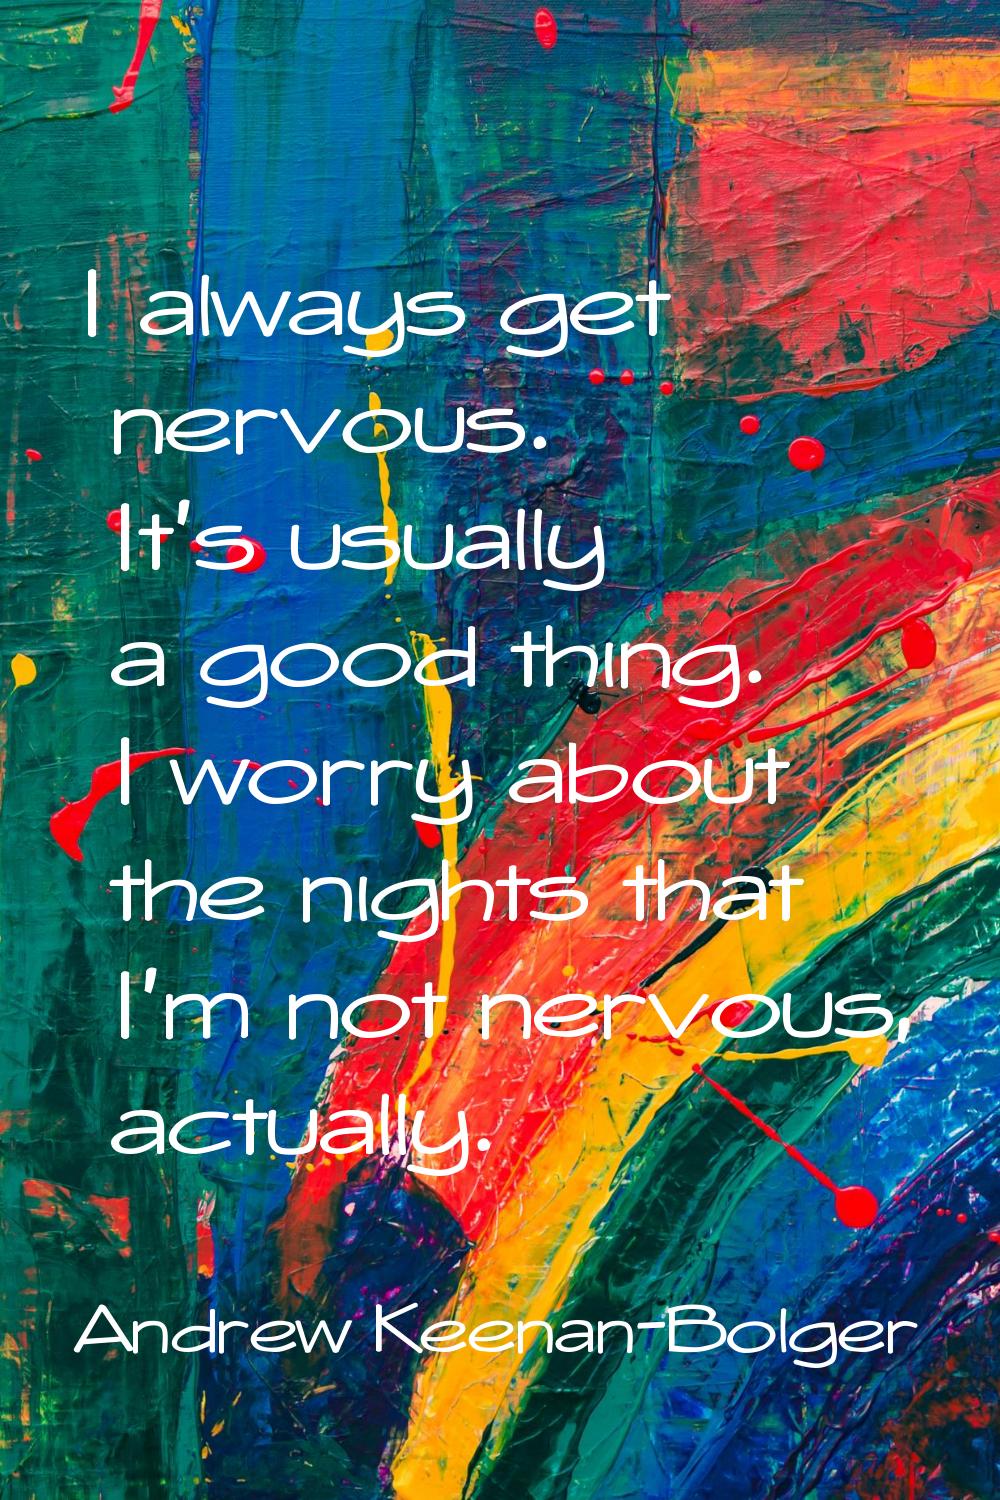 I always get nervous. It's usually a good thing. I worry about the nights that I'm not nervous, act